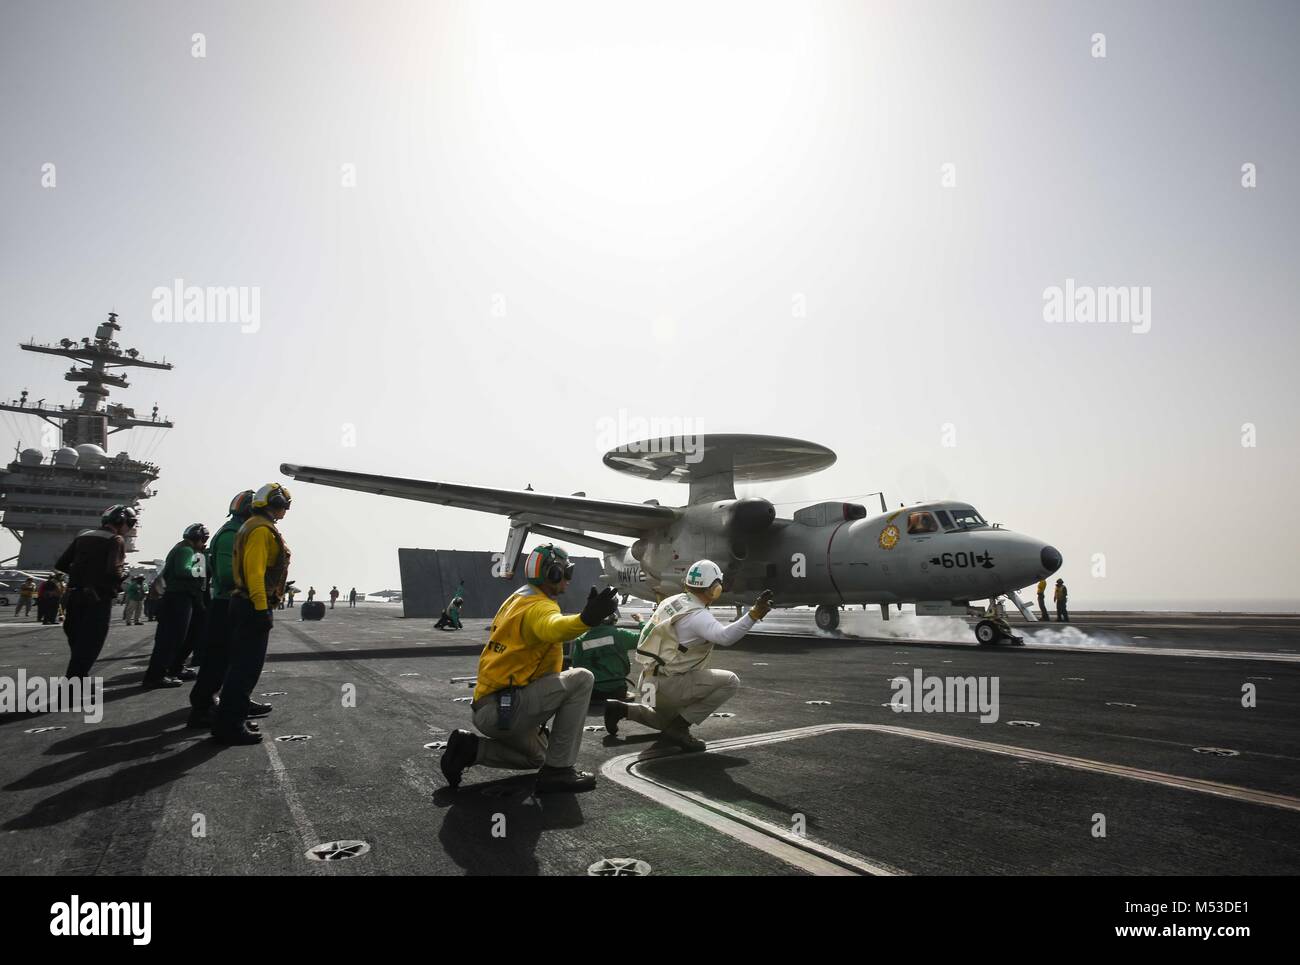 180219-N-VN584-1657 ARABIAN GULF (Feb. 19, 2018) An E-2C Hawkeye, assigned to the Sunkings of Carrier Airborne Early Warning Squadron (VAW) 116, readies for launch on the flight deck of the aircraft carrier USS Theodore Roosevelt (CVN 71). Theodore Roosevelt and its carrier strike group are deployed to the U.S. 5th Fleet area of operations in support of maritime security operations to reassure allies and partners and preserve the freedom of navigation and the free flow of commerce in the region. (U.S. Navy photo by Mass Communication Specialist 3rd Class Alex Corona/Released) Stock Photo